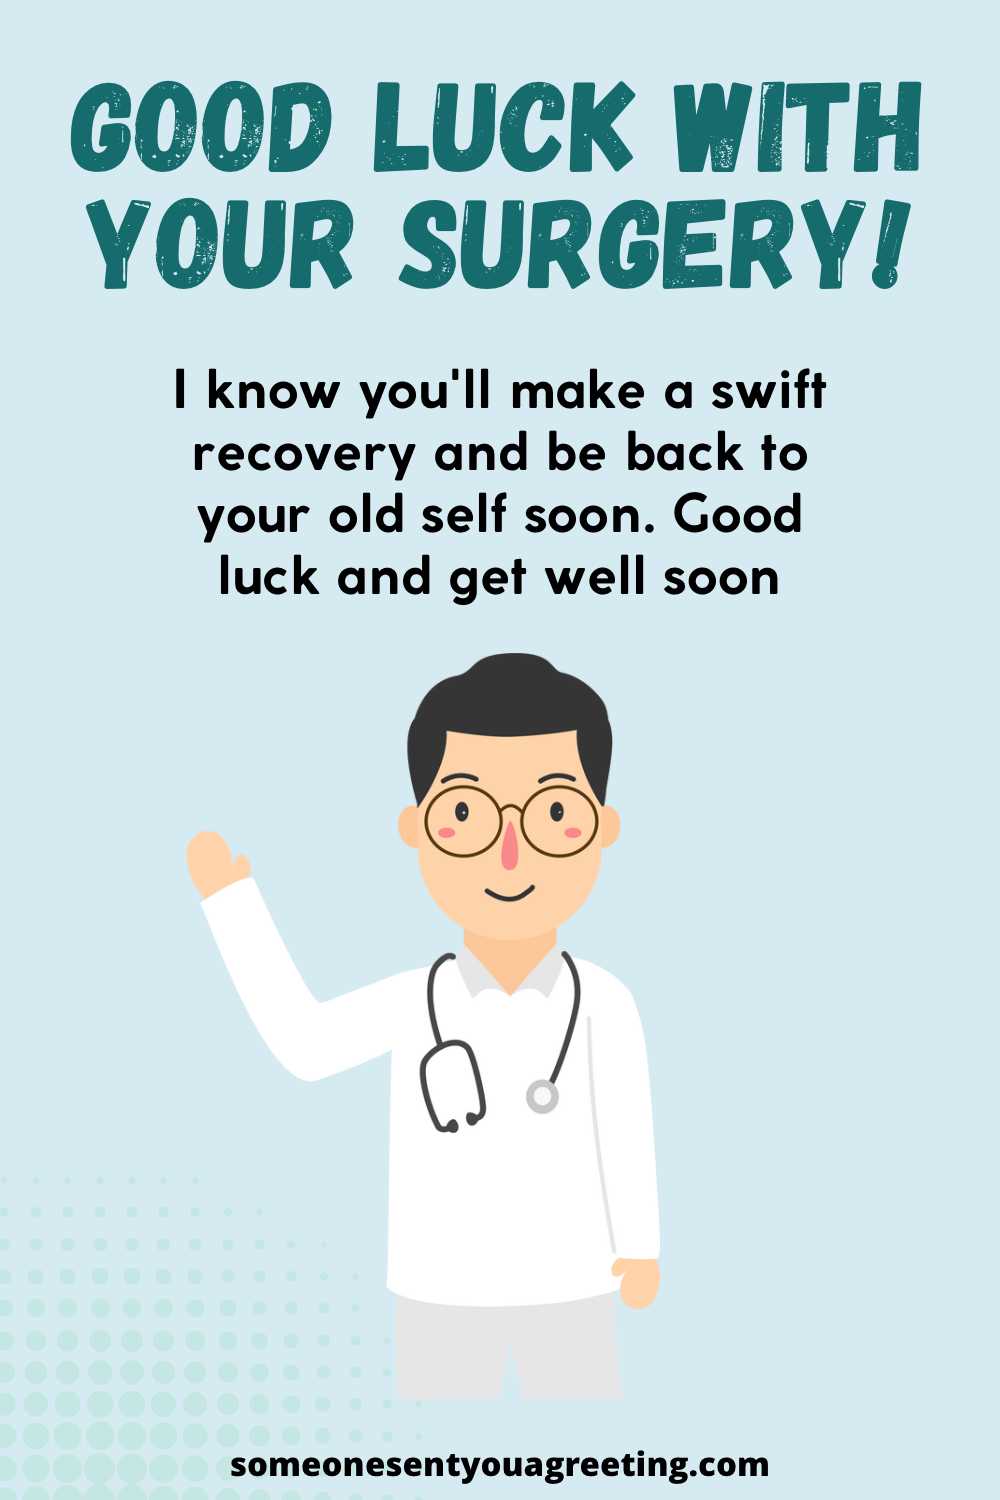 Good Luck For Your Surgery Wishes & Messages - Someone Sent You A Greeting